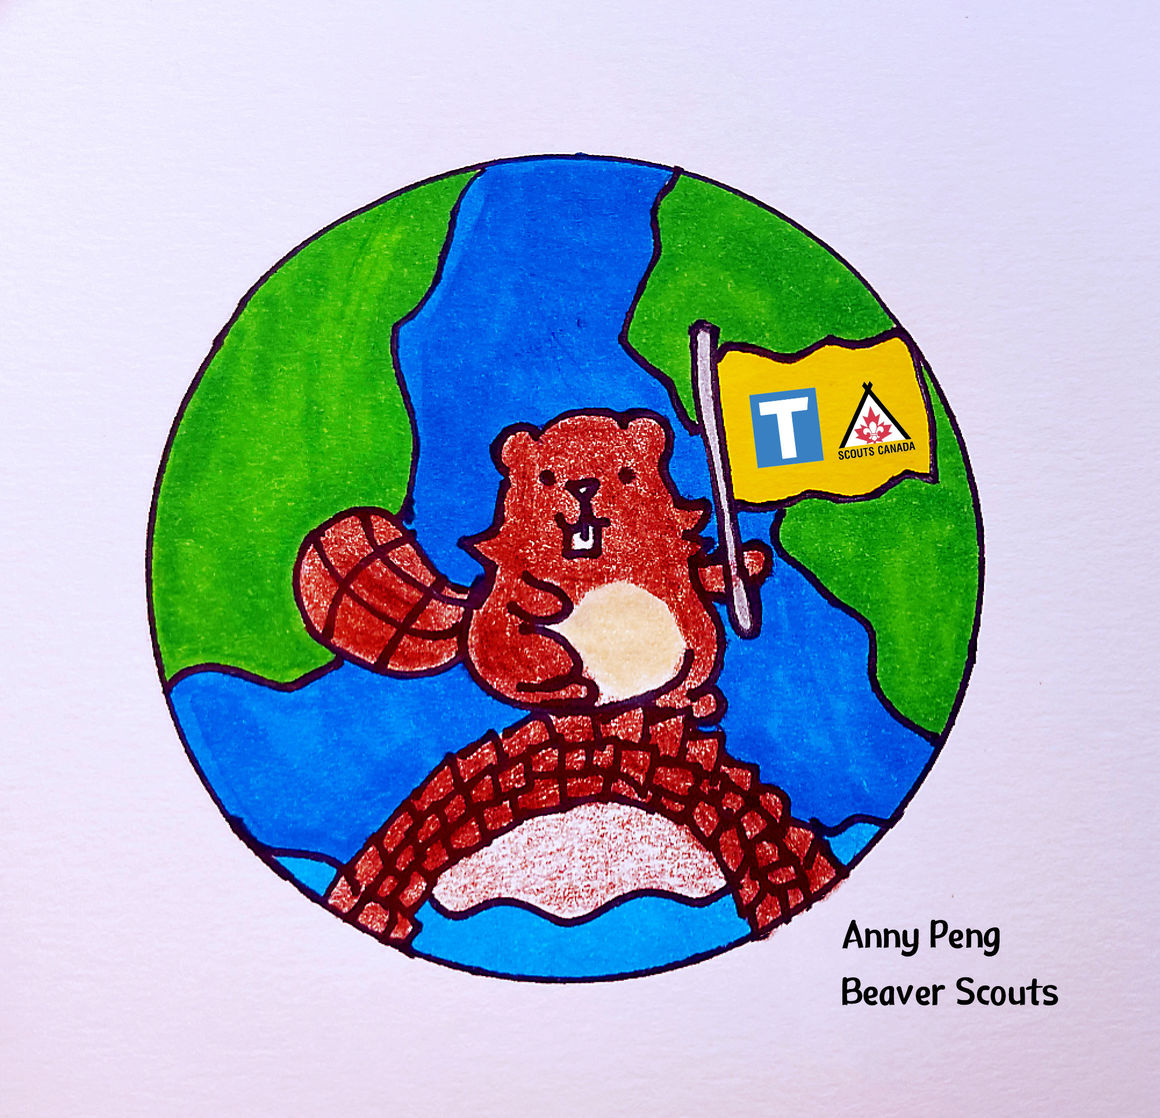 Beaver holding up a yellow flag with TransLink logo, earth drawing in the background